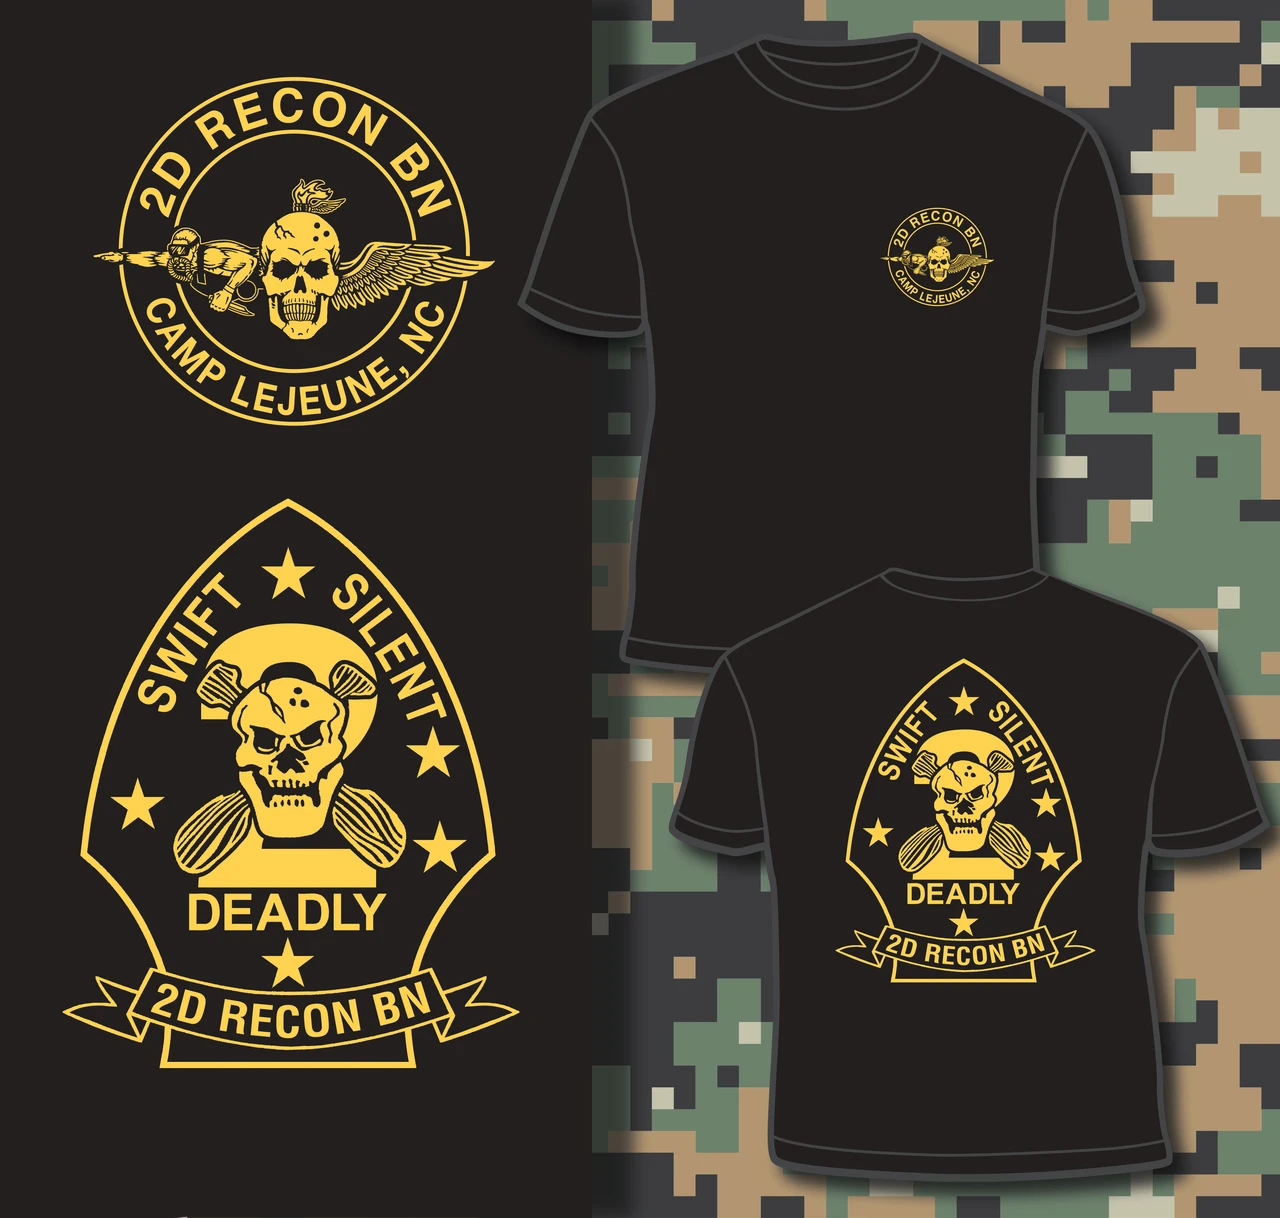 

Camp Lejeune, NC. US Marine Corps 2nd Recon Battalion T Shirt. Short Sleeve 100% Cotton Casual T-shirts Loose Top Size S-3XL